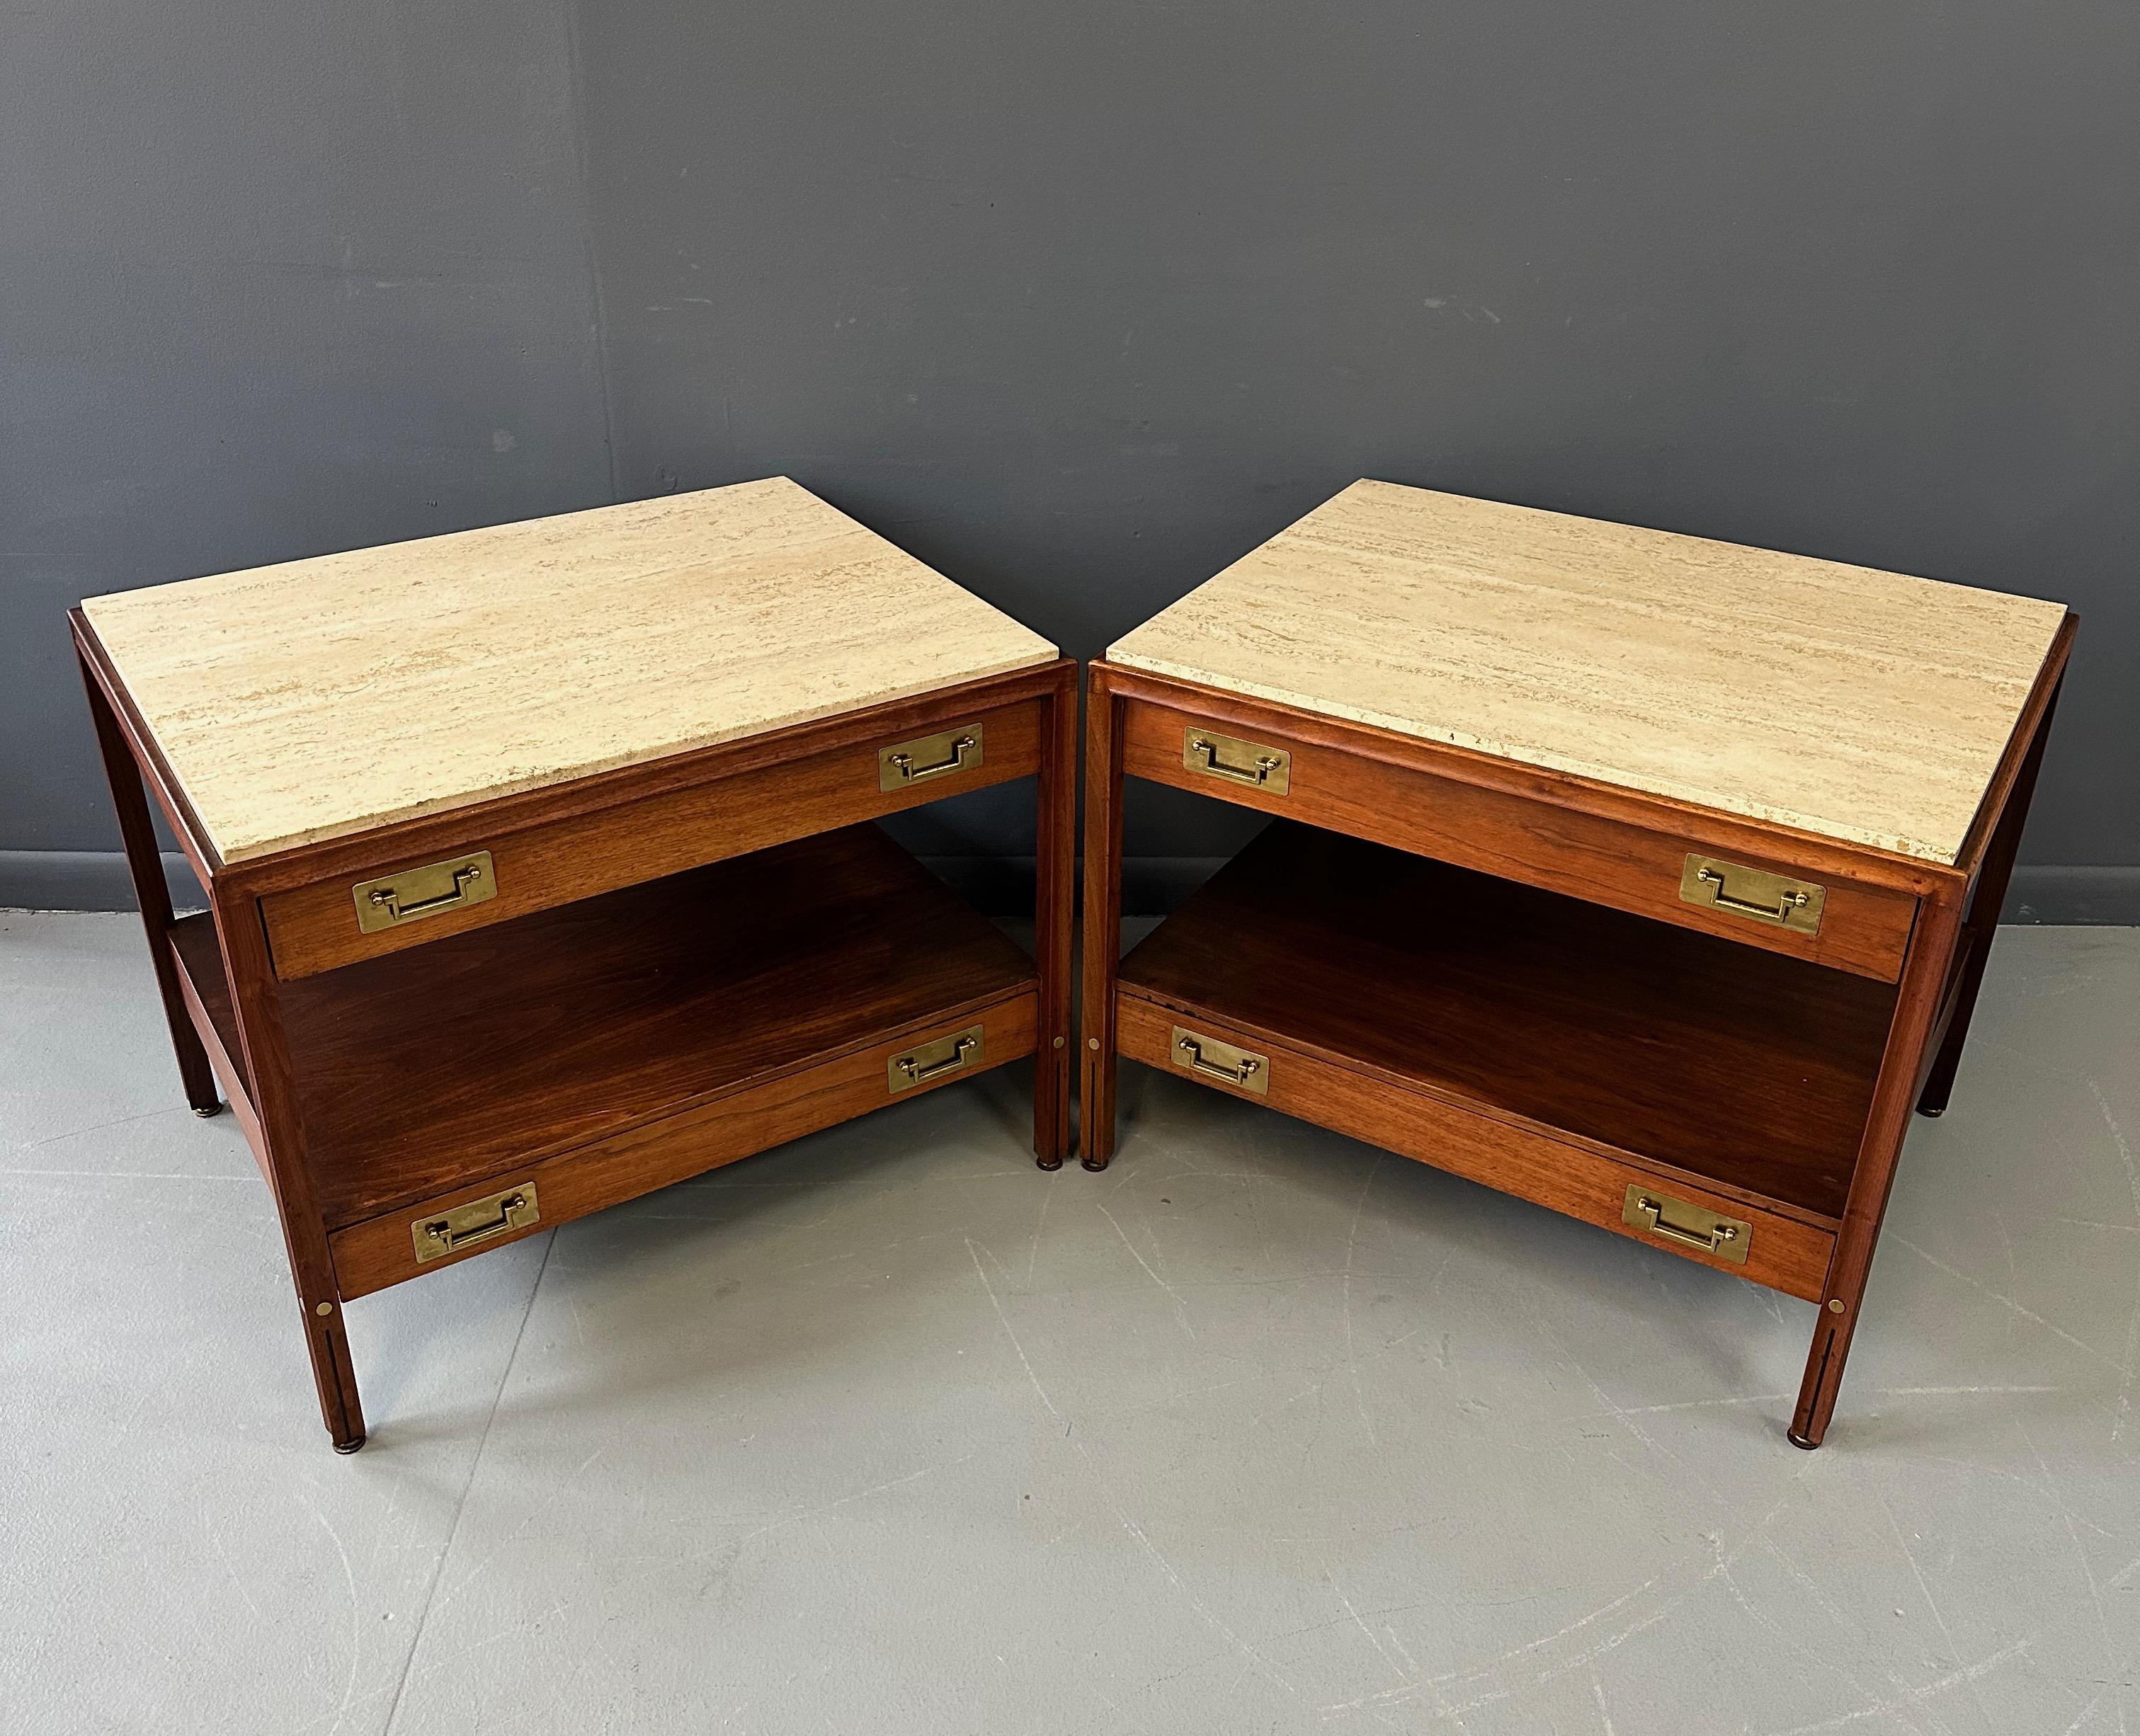 Impressive pair of walnut Nightstands with travertine tops and brass inserts and drawer pulls. These nightstands also have two generous drawers that are the width of the piece. The legs and trim have a lovely scalloped edge with a rosewood insert